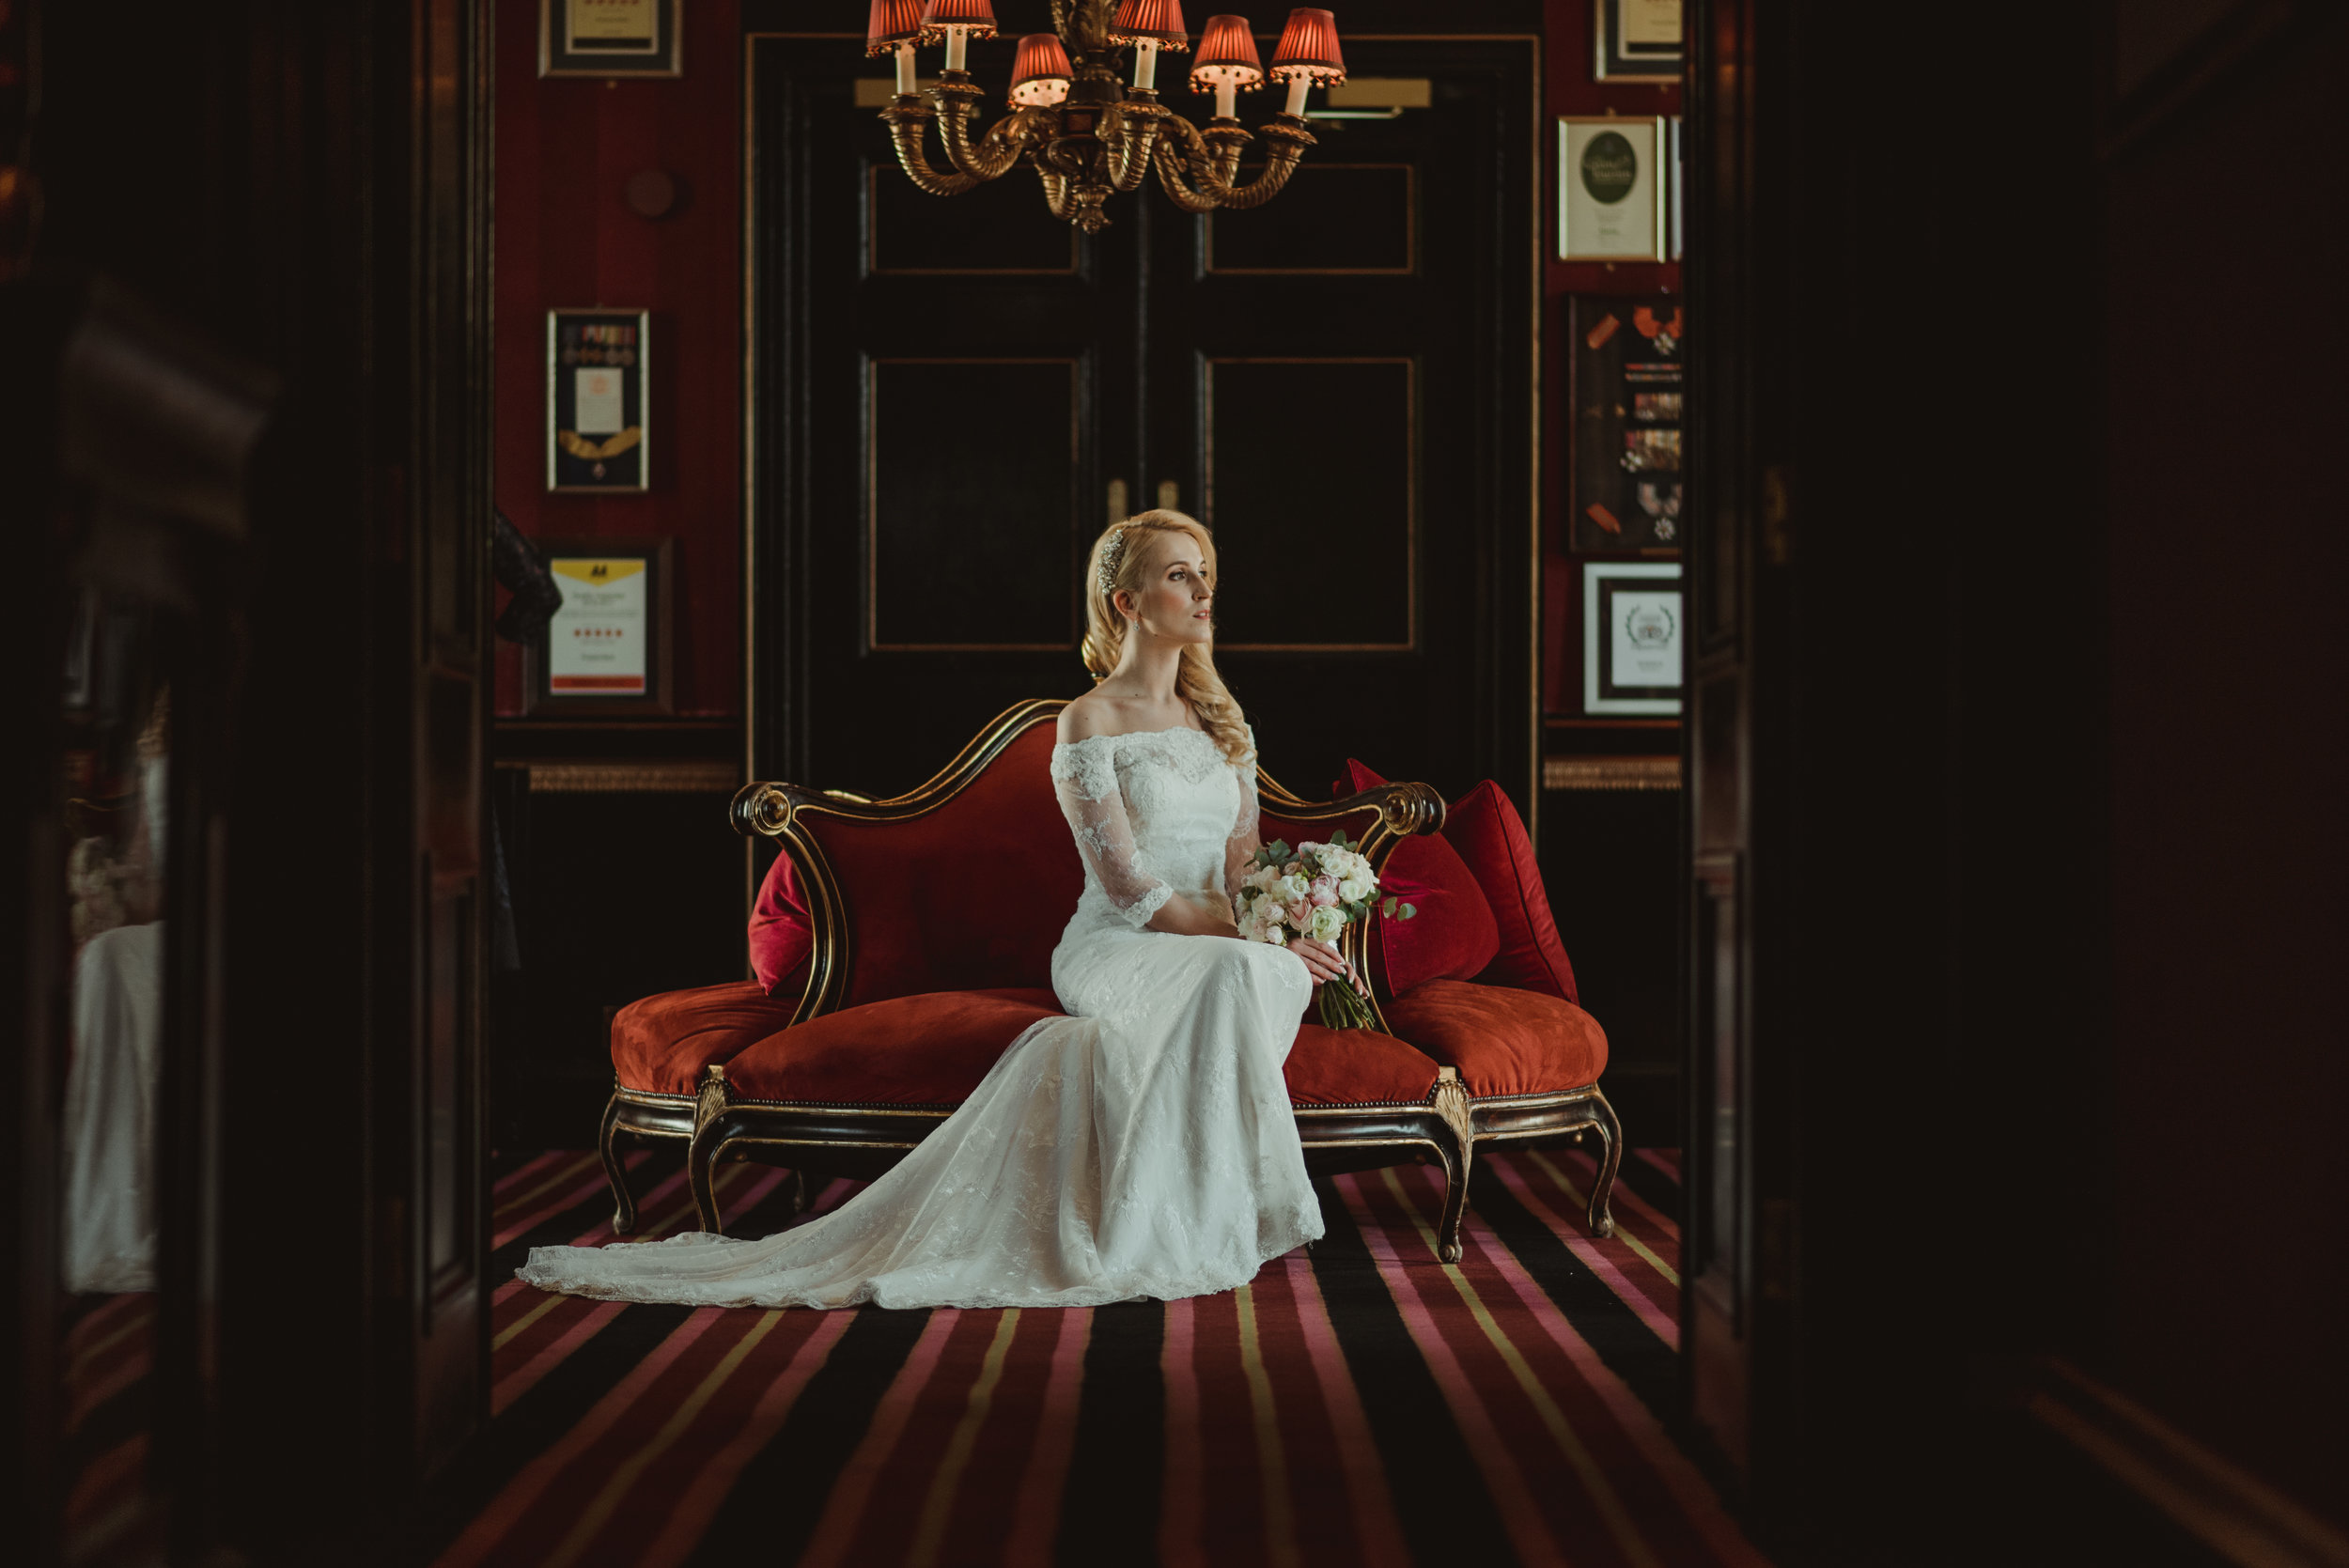  Prestonfield House Wedding photography by Marc Millar Photography 